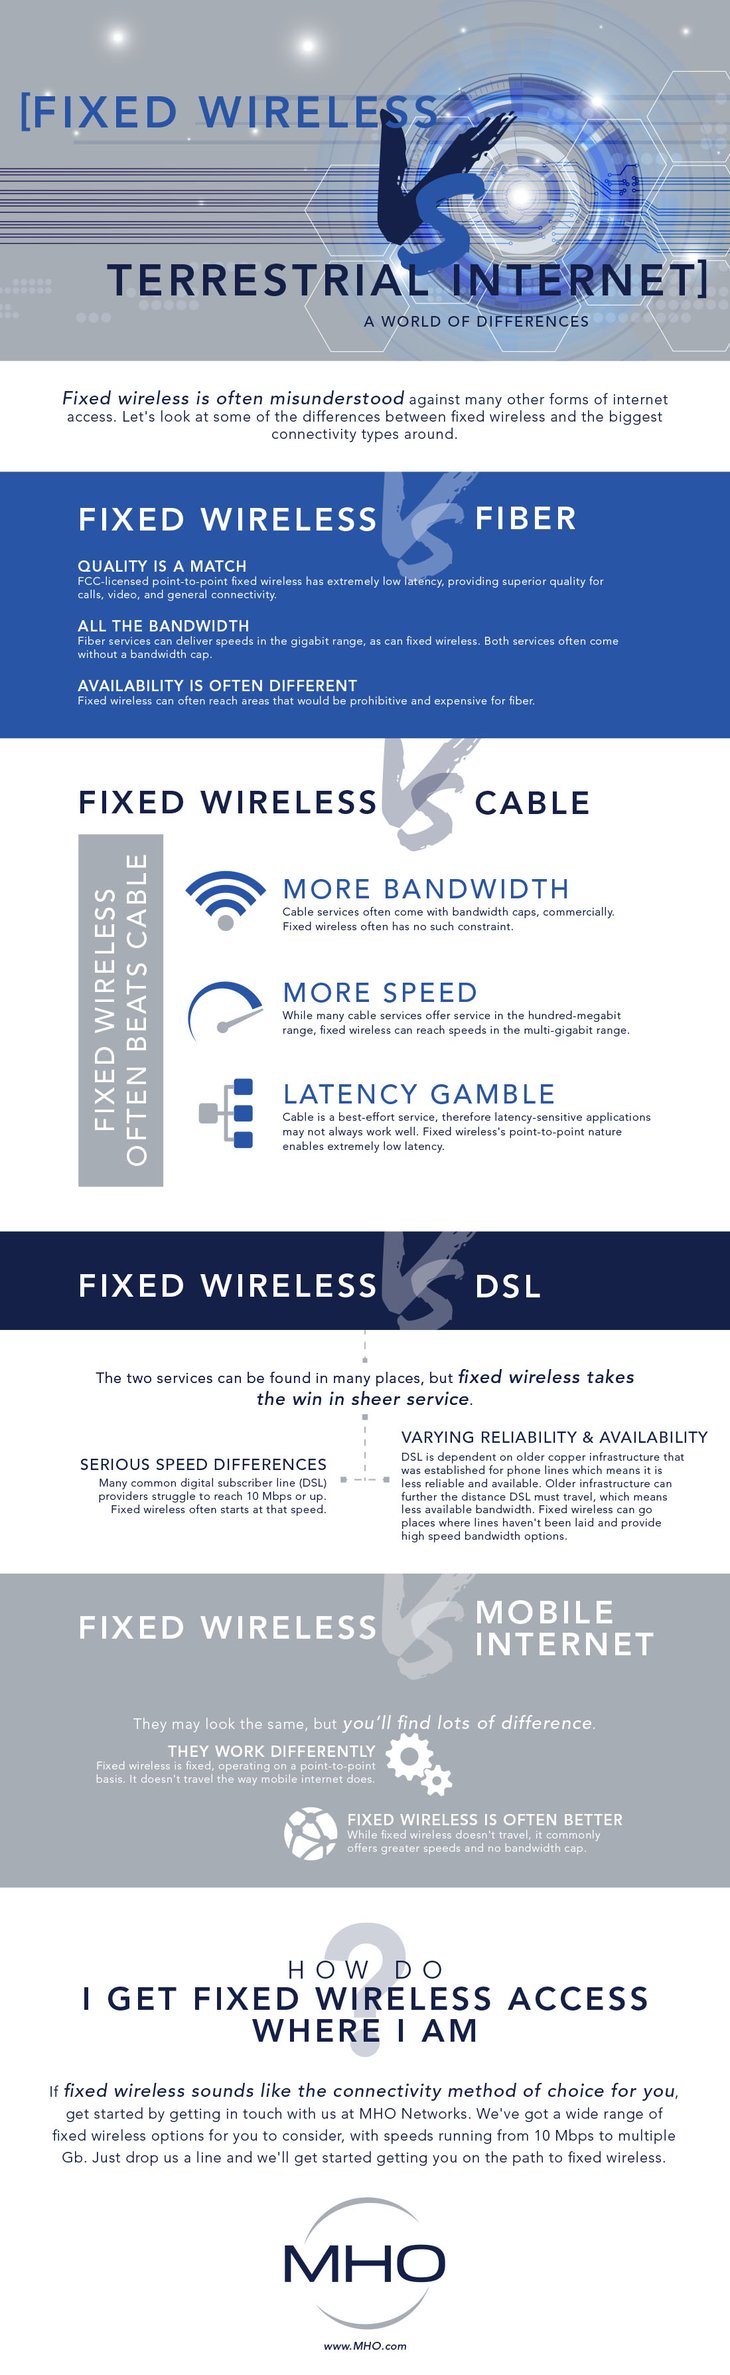 ALL Wireless Services